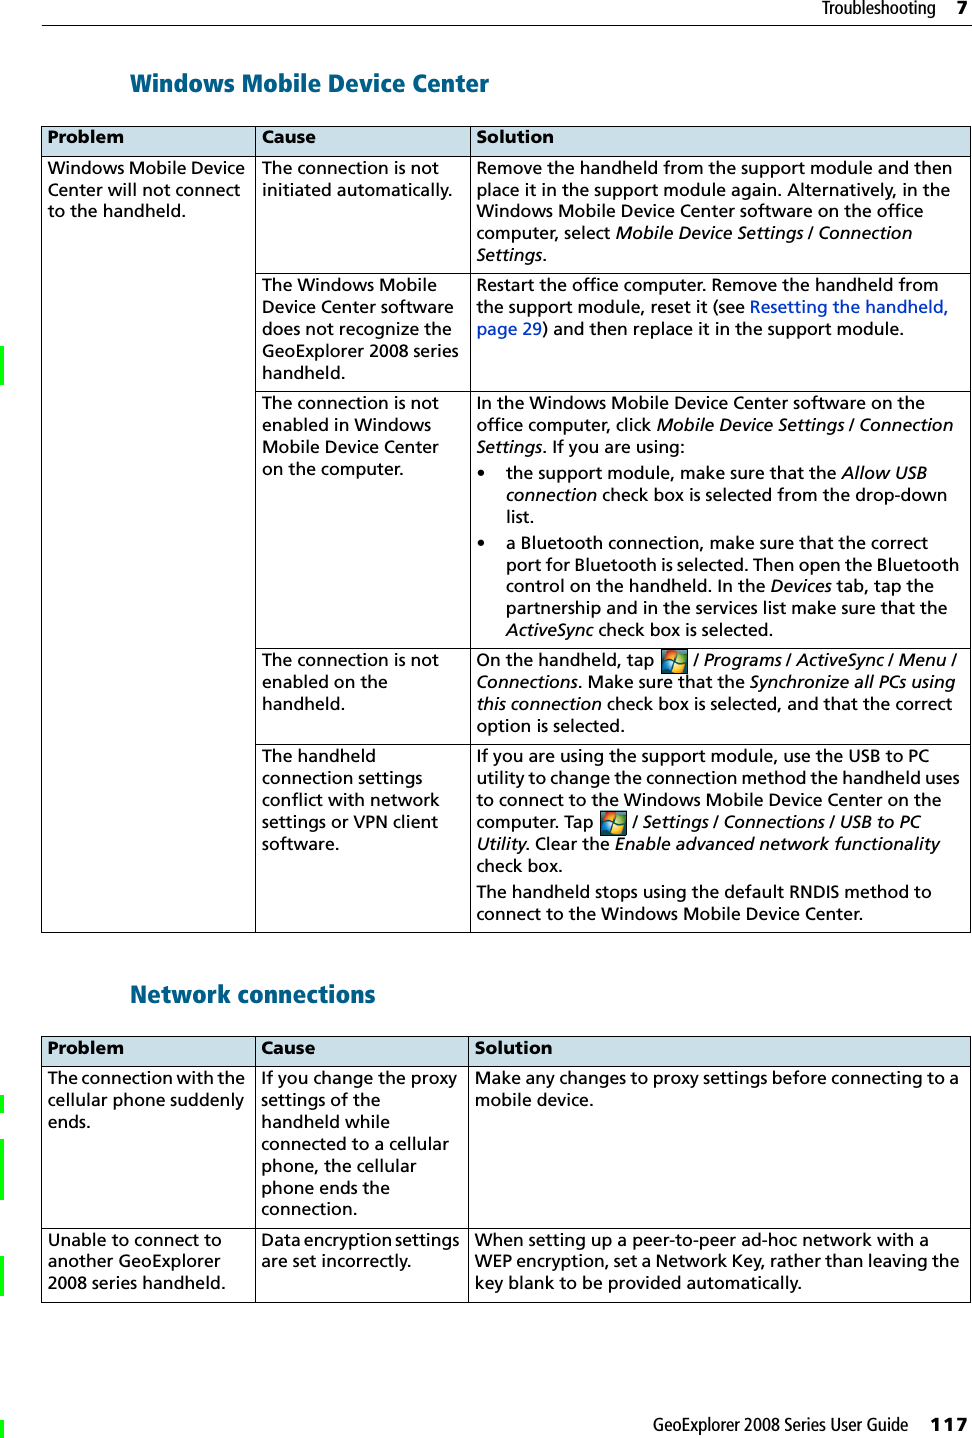 GeoExplorer 2008 Series User Guide     117Troubleshooting     7Windows Mobile Device Center   Network connections   Problem Cause SolutionWindows Mobile Device Center will not connect to the handheld.The connection is not initiated automatically.Remove the handheld from the support module and then place it in the support module again. Alternatively, in the Windows Mobile Device Center software on the office computer, select Mobile Device Settings /Connection Settings.The Windows Mobile Device Center software does not recognize the GeoExplorer 2008 series handheld.Restart the office computer. Remove the handheld from the support module, reset it (see Resetting the handheld, page 29) and then replace it in the support module.The connection is not enabled in Windows Mobile Device Center on the computer.In the Windows Mobile Device Center software on the office computer, click Mobile Device Settings / Connection Settings. If you are using:• the support module, make sure that the Allow USB connection check box is selected from the drop-down list.• a Bluetooth connection, make sure that the correct port for Bluetooth is selected. Then open the Bluetooth control on the handheld. In the Devices tab, tap the partnership and in the services list make sure that the ActiveSync check box is selected.The connection is not enabled on the handheld.On the handheld, tap  / Programs / ActiveSync / Menu / Connections. Make sure that the Synchronize all PCs using this connection check box is selected, and that the correct option is selected.The handheld connection settings conflict with network settings or VPN client software.If you are using the support module, use the USB to PC utility to change the connection method the handheld uses to connect to the Windows Mobile Device Center on the computer. Tap  / Settings / Connections / USB to PC Utility. Clear the Enable advanced network functionality check box.The handheld stops using the default RNDIS method to connect to the Windows Mobile Device Center.Problem Cause SolutionThe connection with the cellular phone suddenly ends.If you change the proxy settings of the handheld while connected to a cellular phone, the cellular phone ends the connection.Make any changes to proxy settings before connecting to a mobile device.Unable to connect to another GeoExplorer 2008 series handheld.Data encryption settings are set incorrectly.When setting up a peer-to-peer ad-hoc network with a WEP encryption, set a Network Key, rather than leaving the key blank to be provided automatically. 